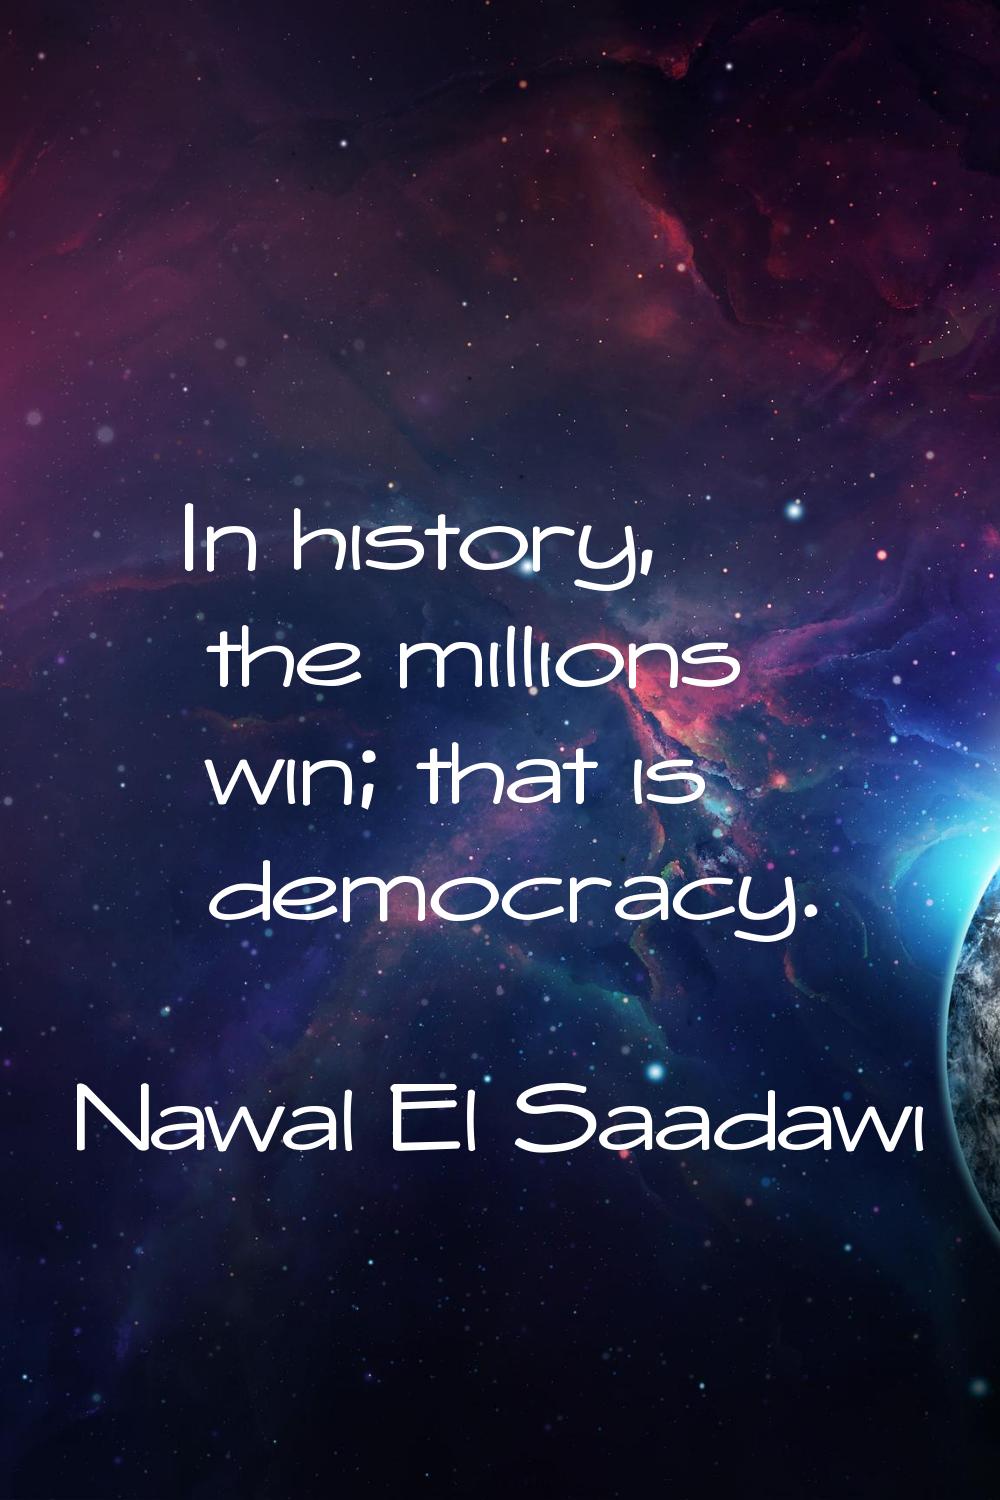 In history, the millions win; that is democracy.